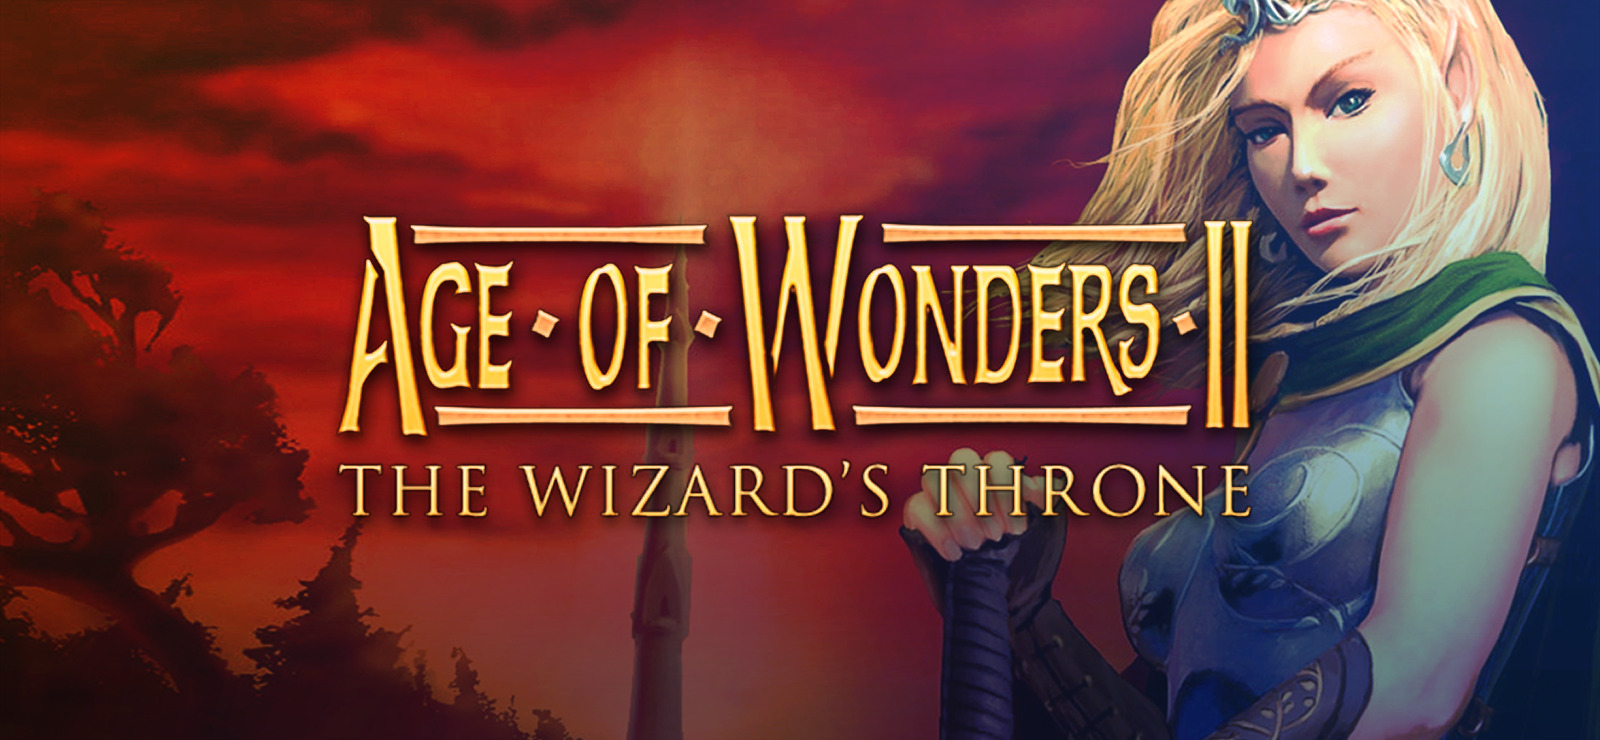 age-of-wonders-2-the-wizard-s-throne-free-download-v1-20-0-3100-gog-unlocked